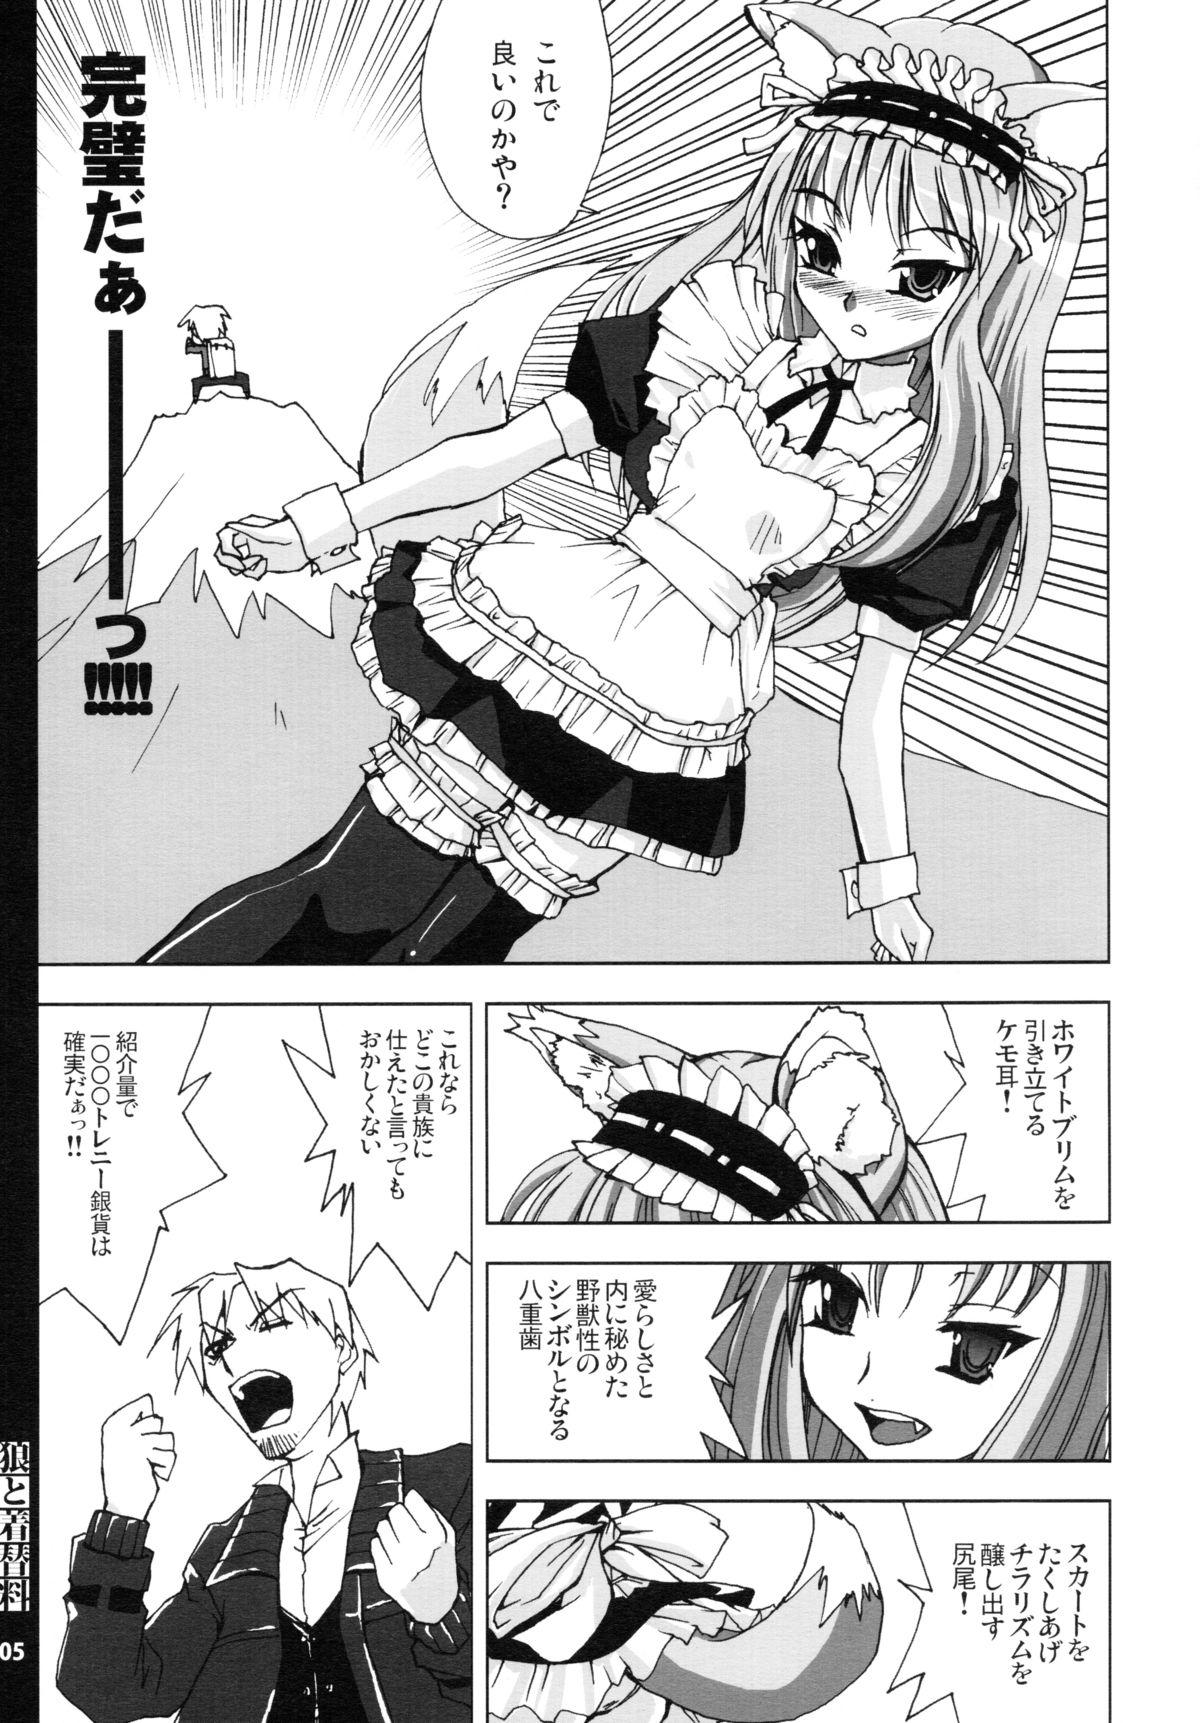 Girlfriends Ookami to Cosplay-ryou - Spice and wolf Rubbing - Page 5